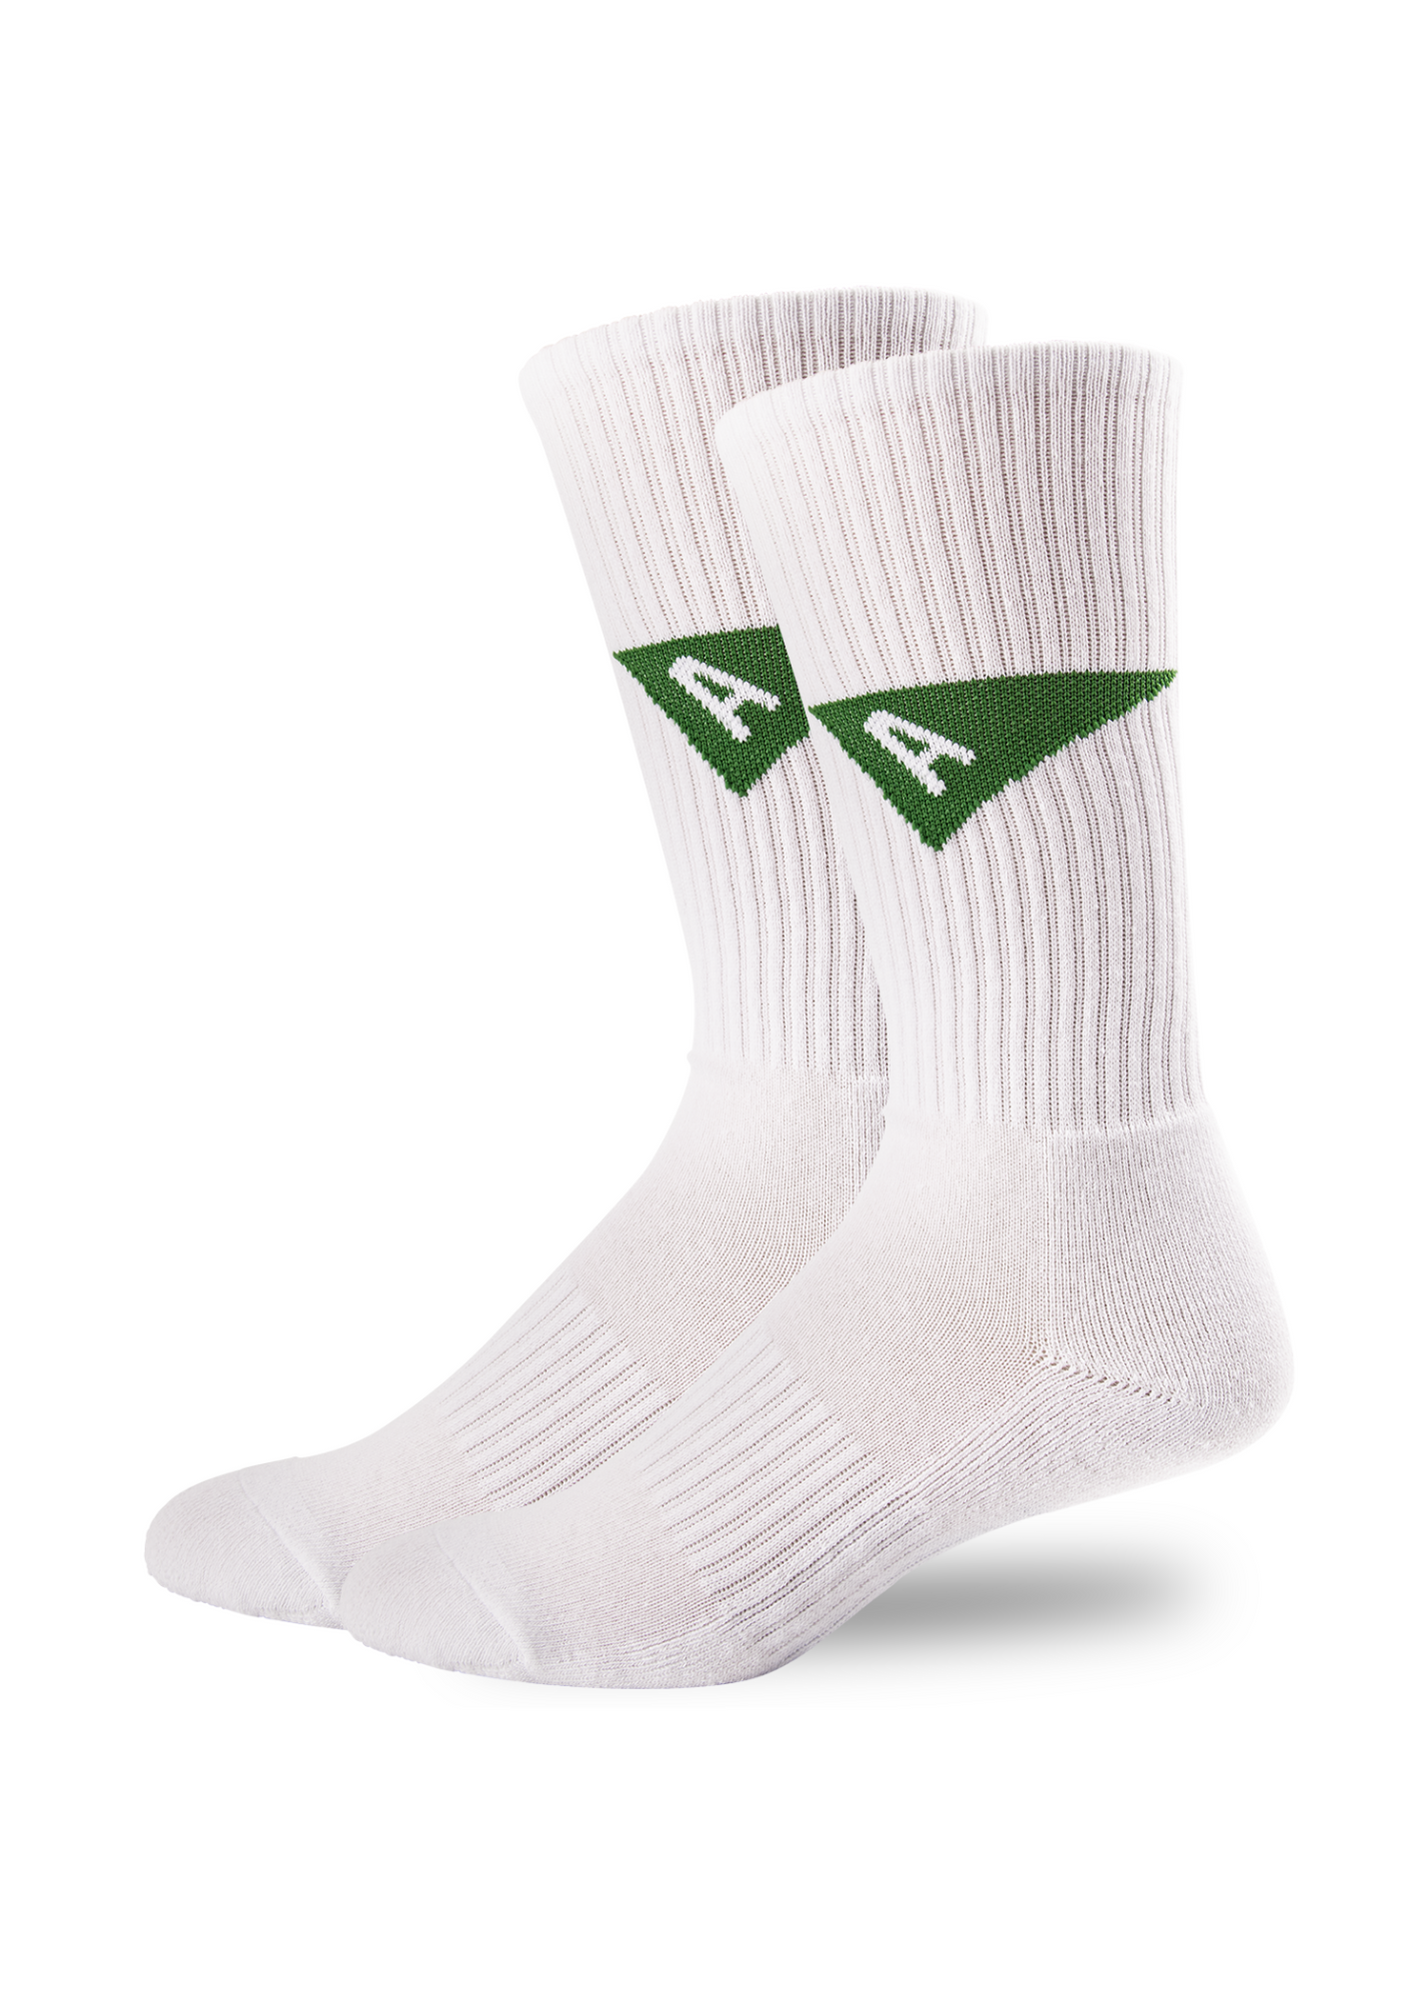 Arvin Goods Tall Crew Sock White with Green Arvin Flag Design